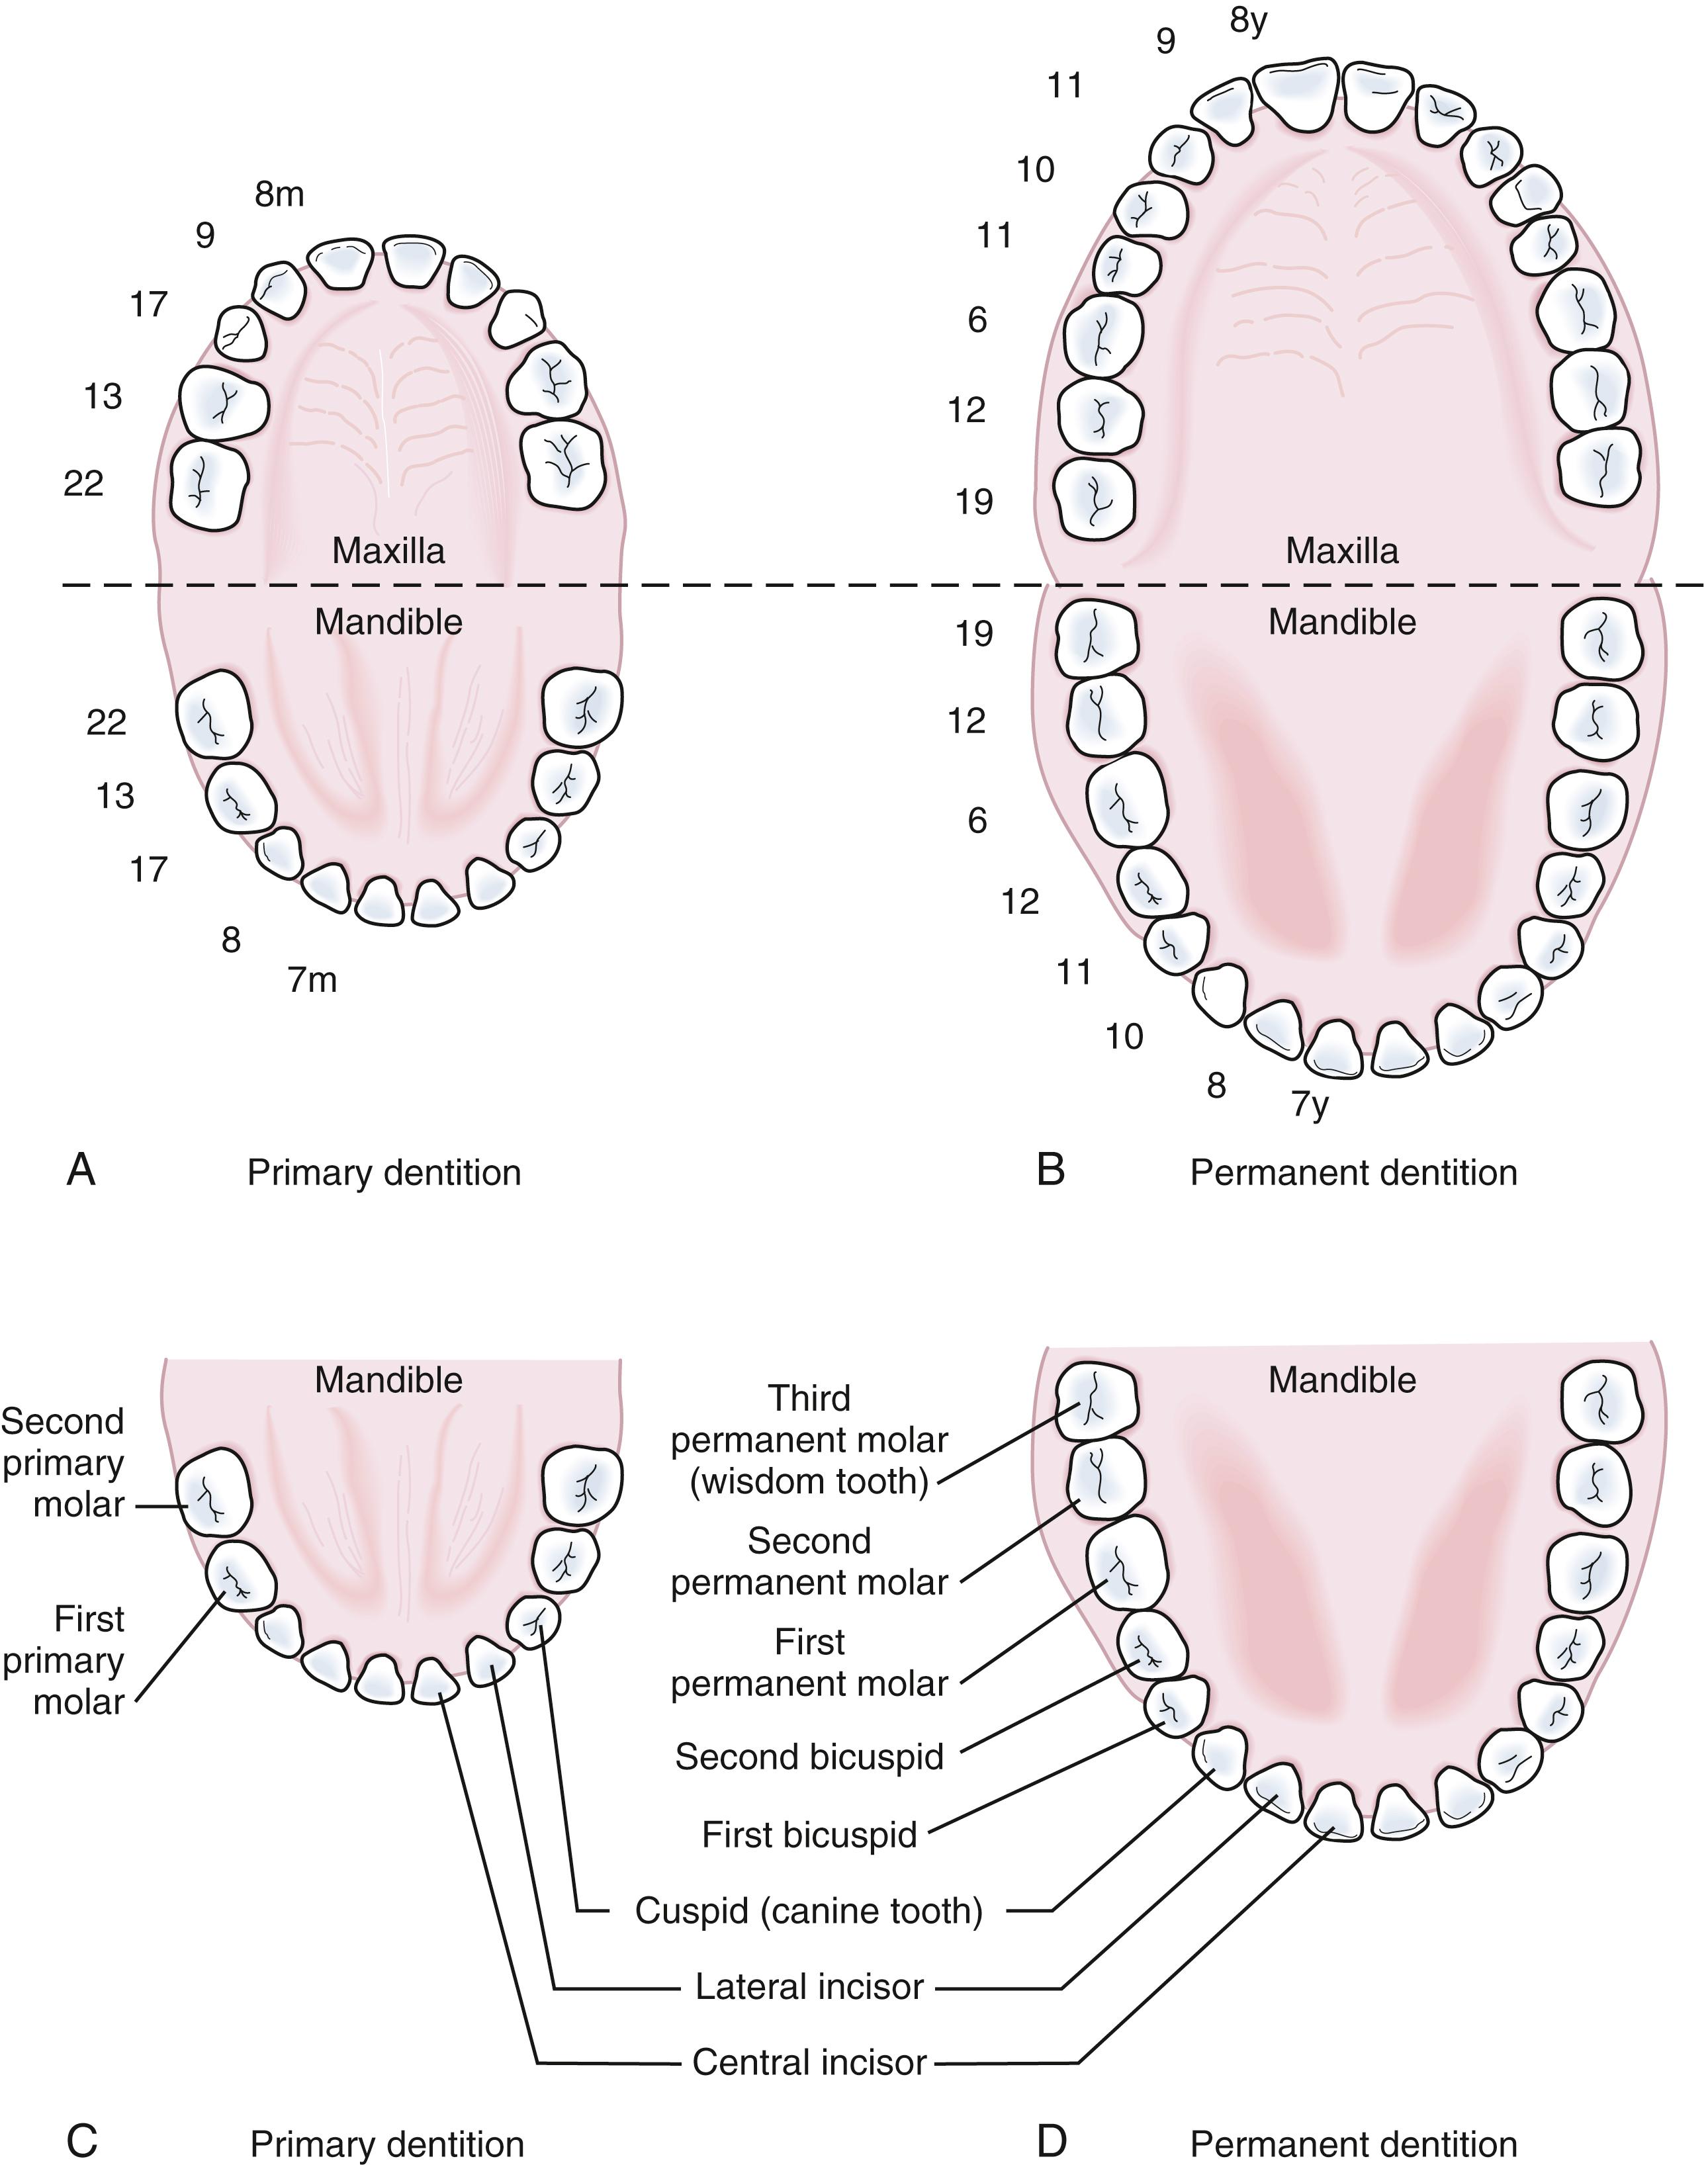 Fig. 21.10, Artist’s illustrations of the primary and permanent dentition. (A) and (B) The numbers represent the average age of eruption for the teeth, indicated in months for the primary teeth and years for the permanent dentition. (C) and (D) The names of specific teeth in the primary and permanent dentition are shown. (E) and (F) Tooth numbers diagram: primary teeth are lettered A to J from upper right to upper left and K to T from lower left to lower right. Secondary teeth are numbered 1 to 16 from upper right to upper left and 17 to 32 from lower left to lower right.